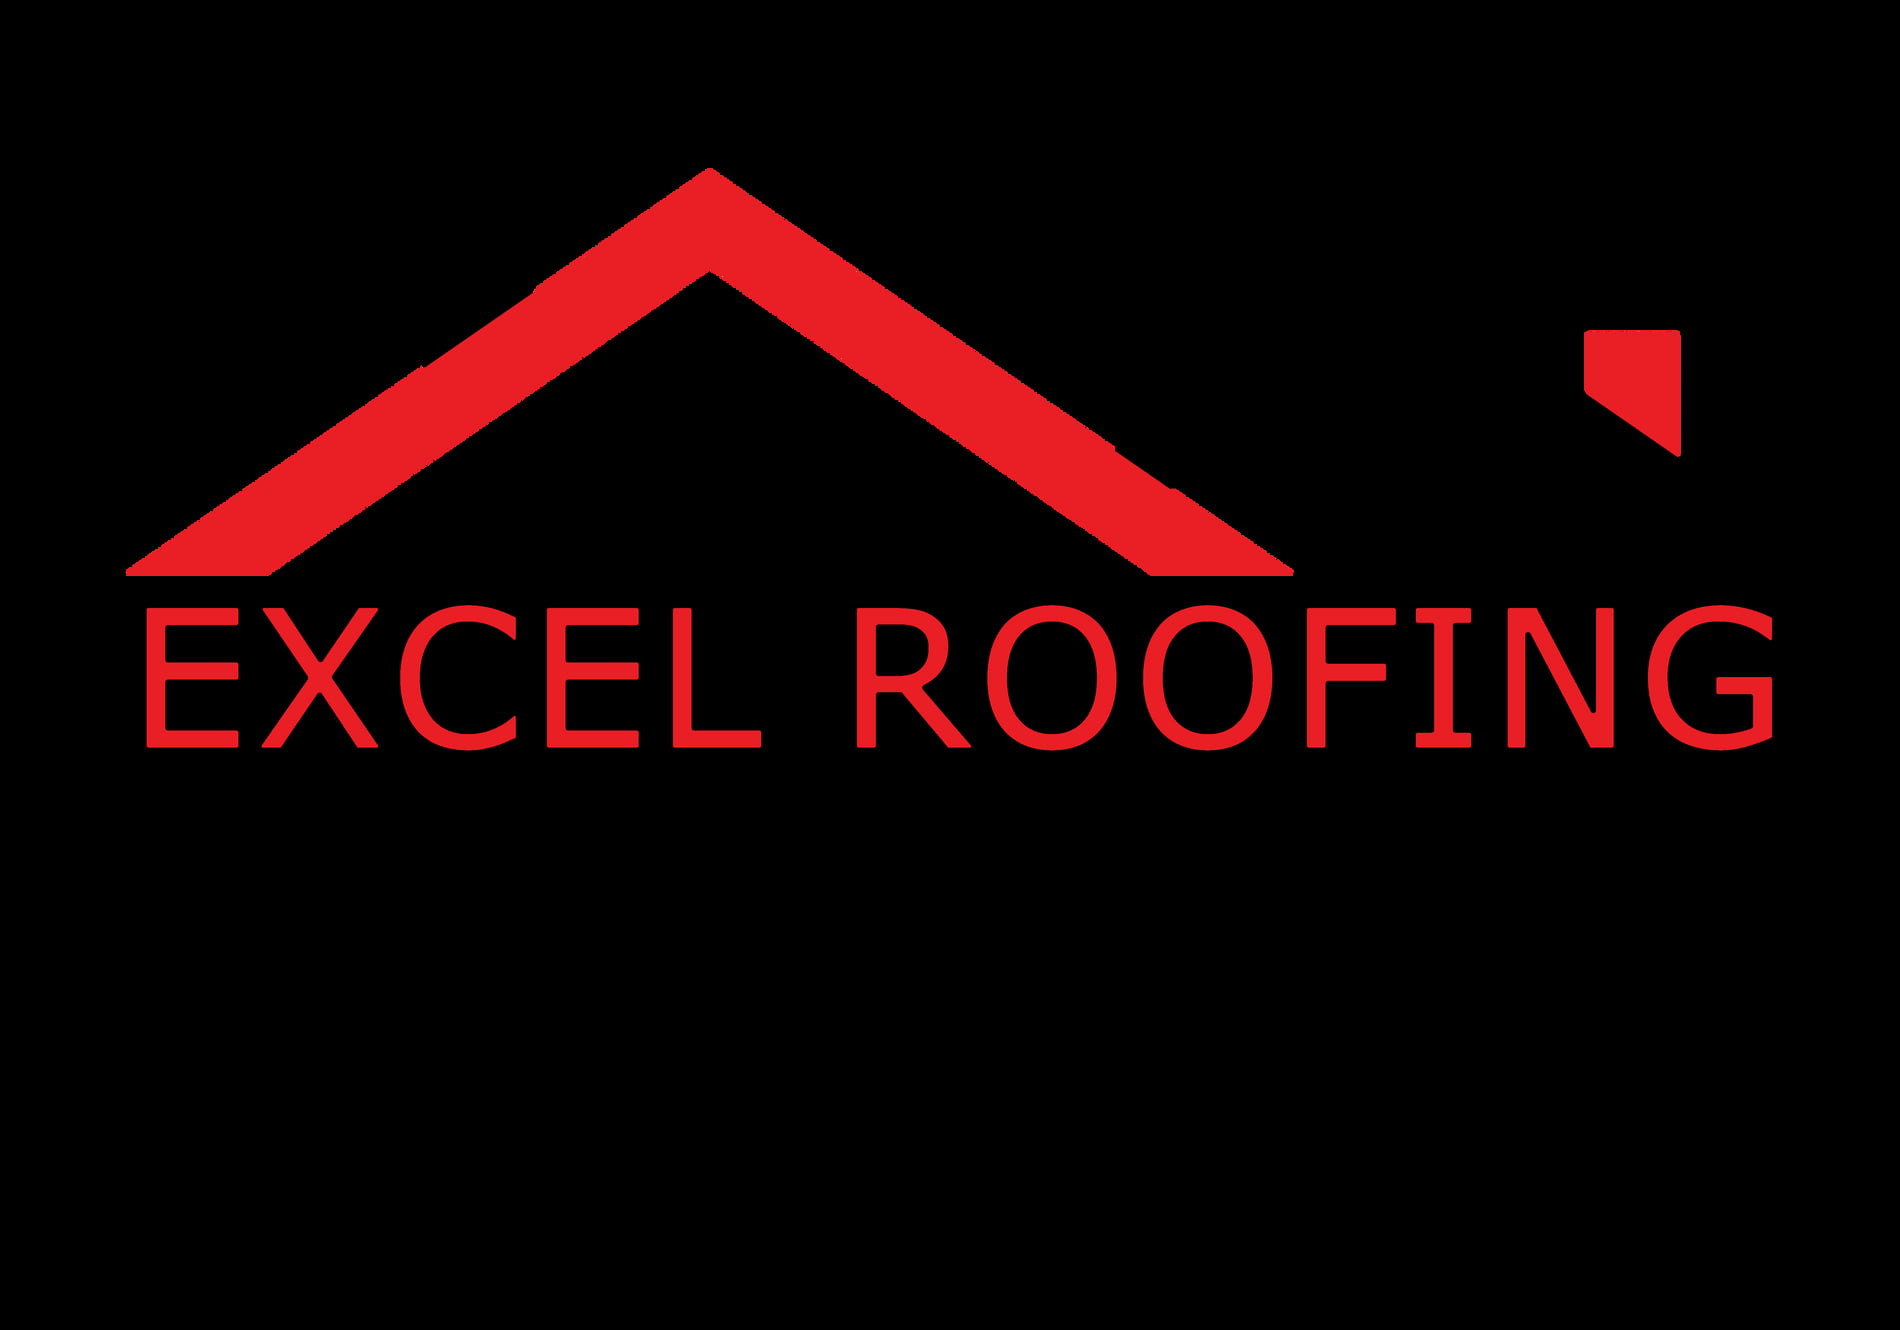 Excel Roofing Mn roofing company in Minnesota